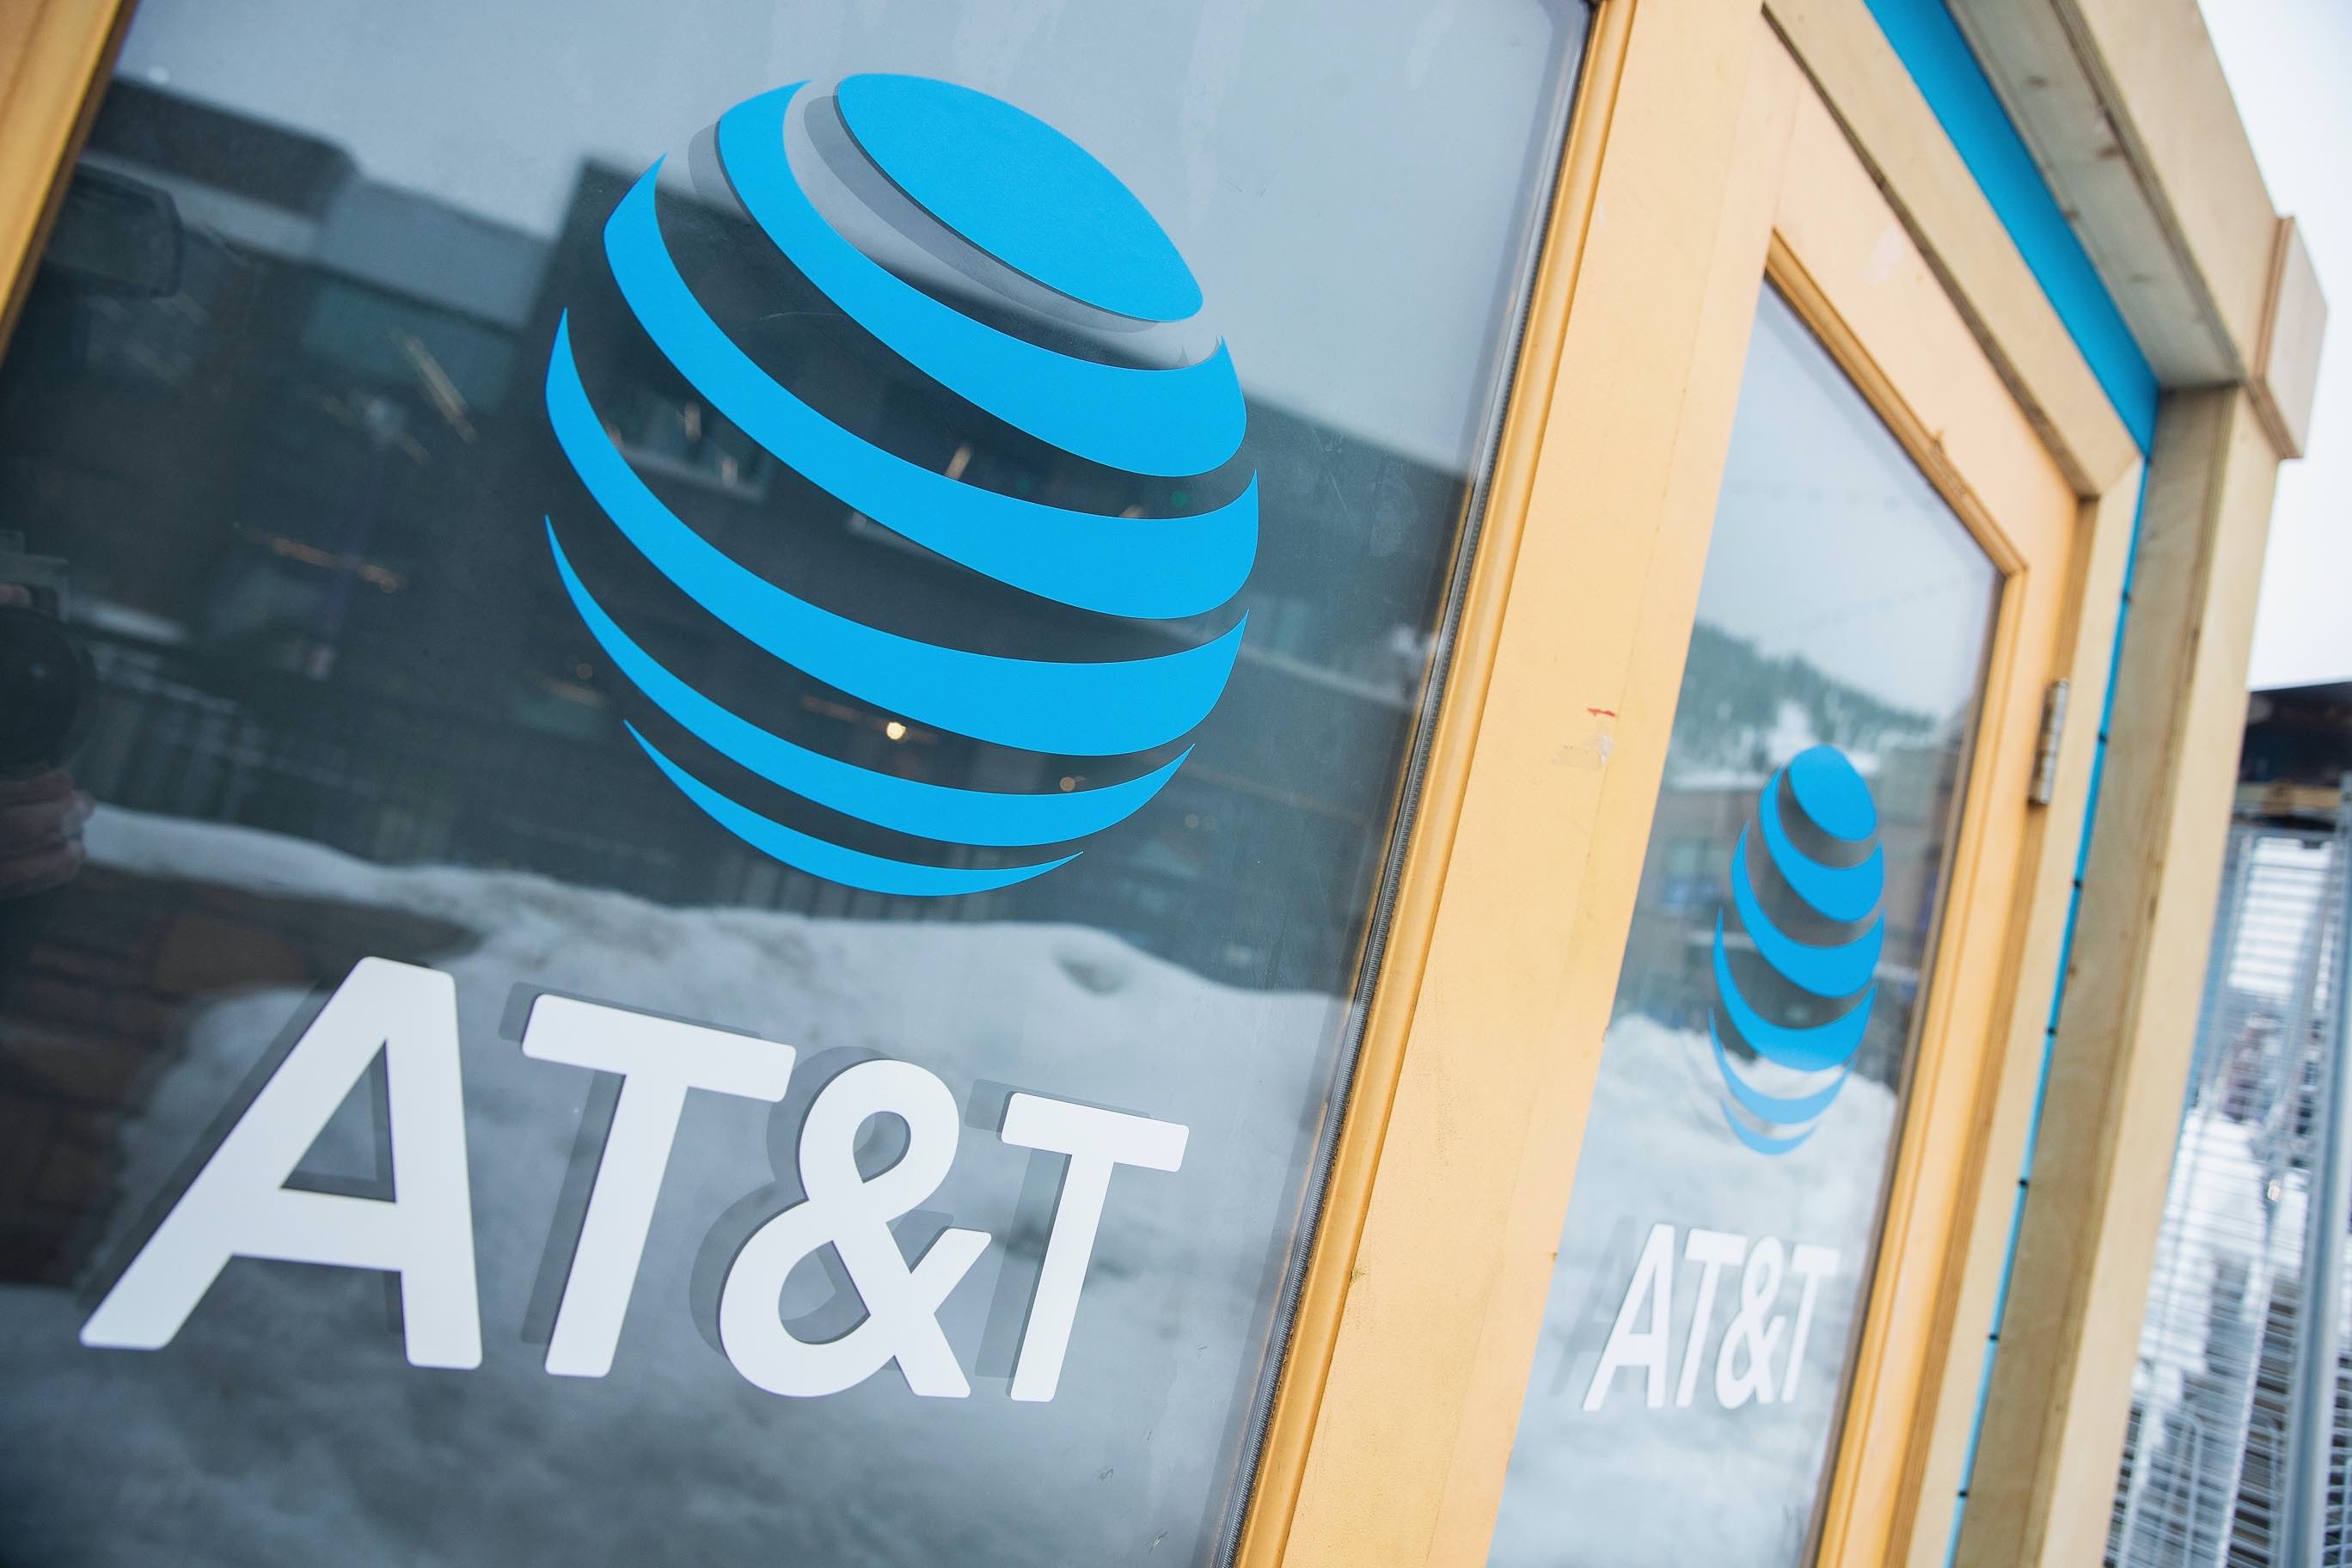 AT&T store image